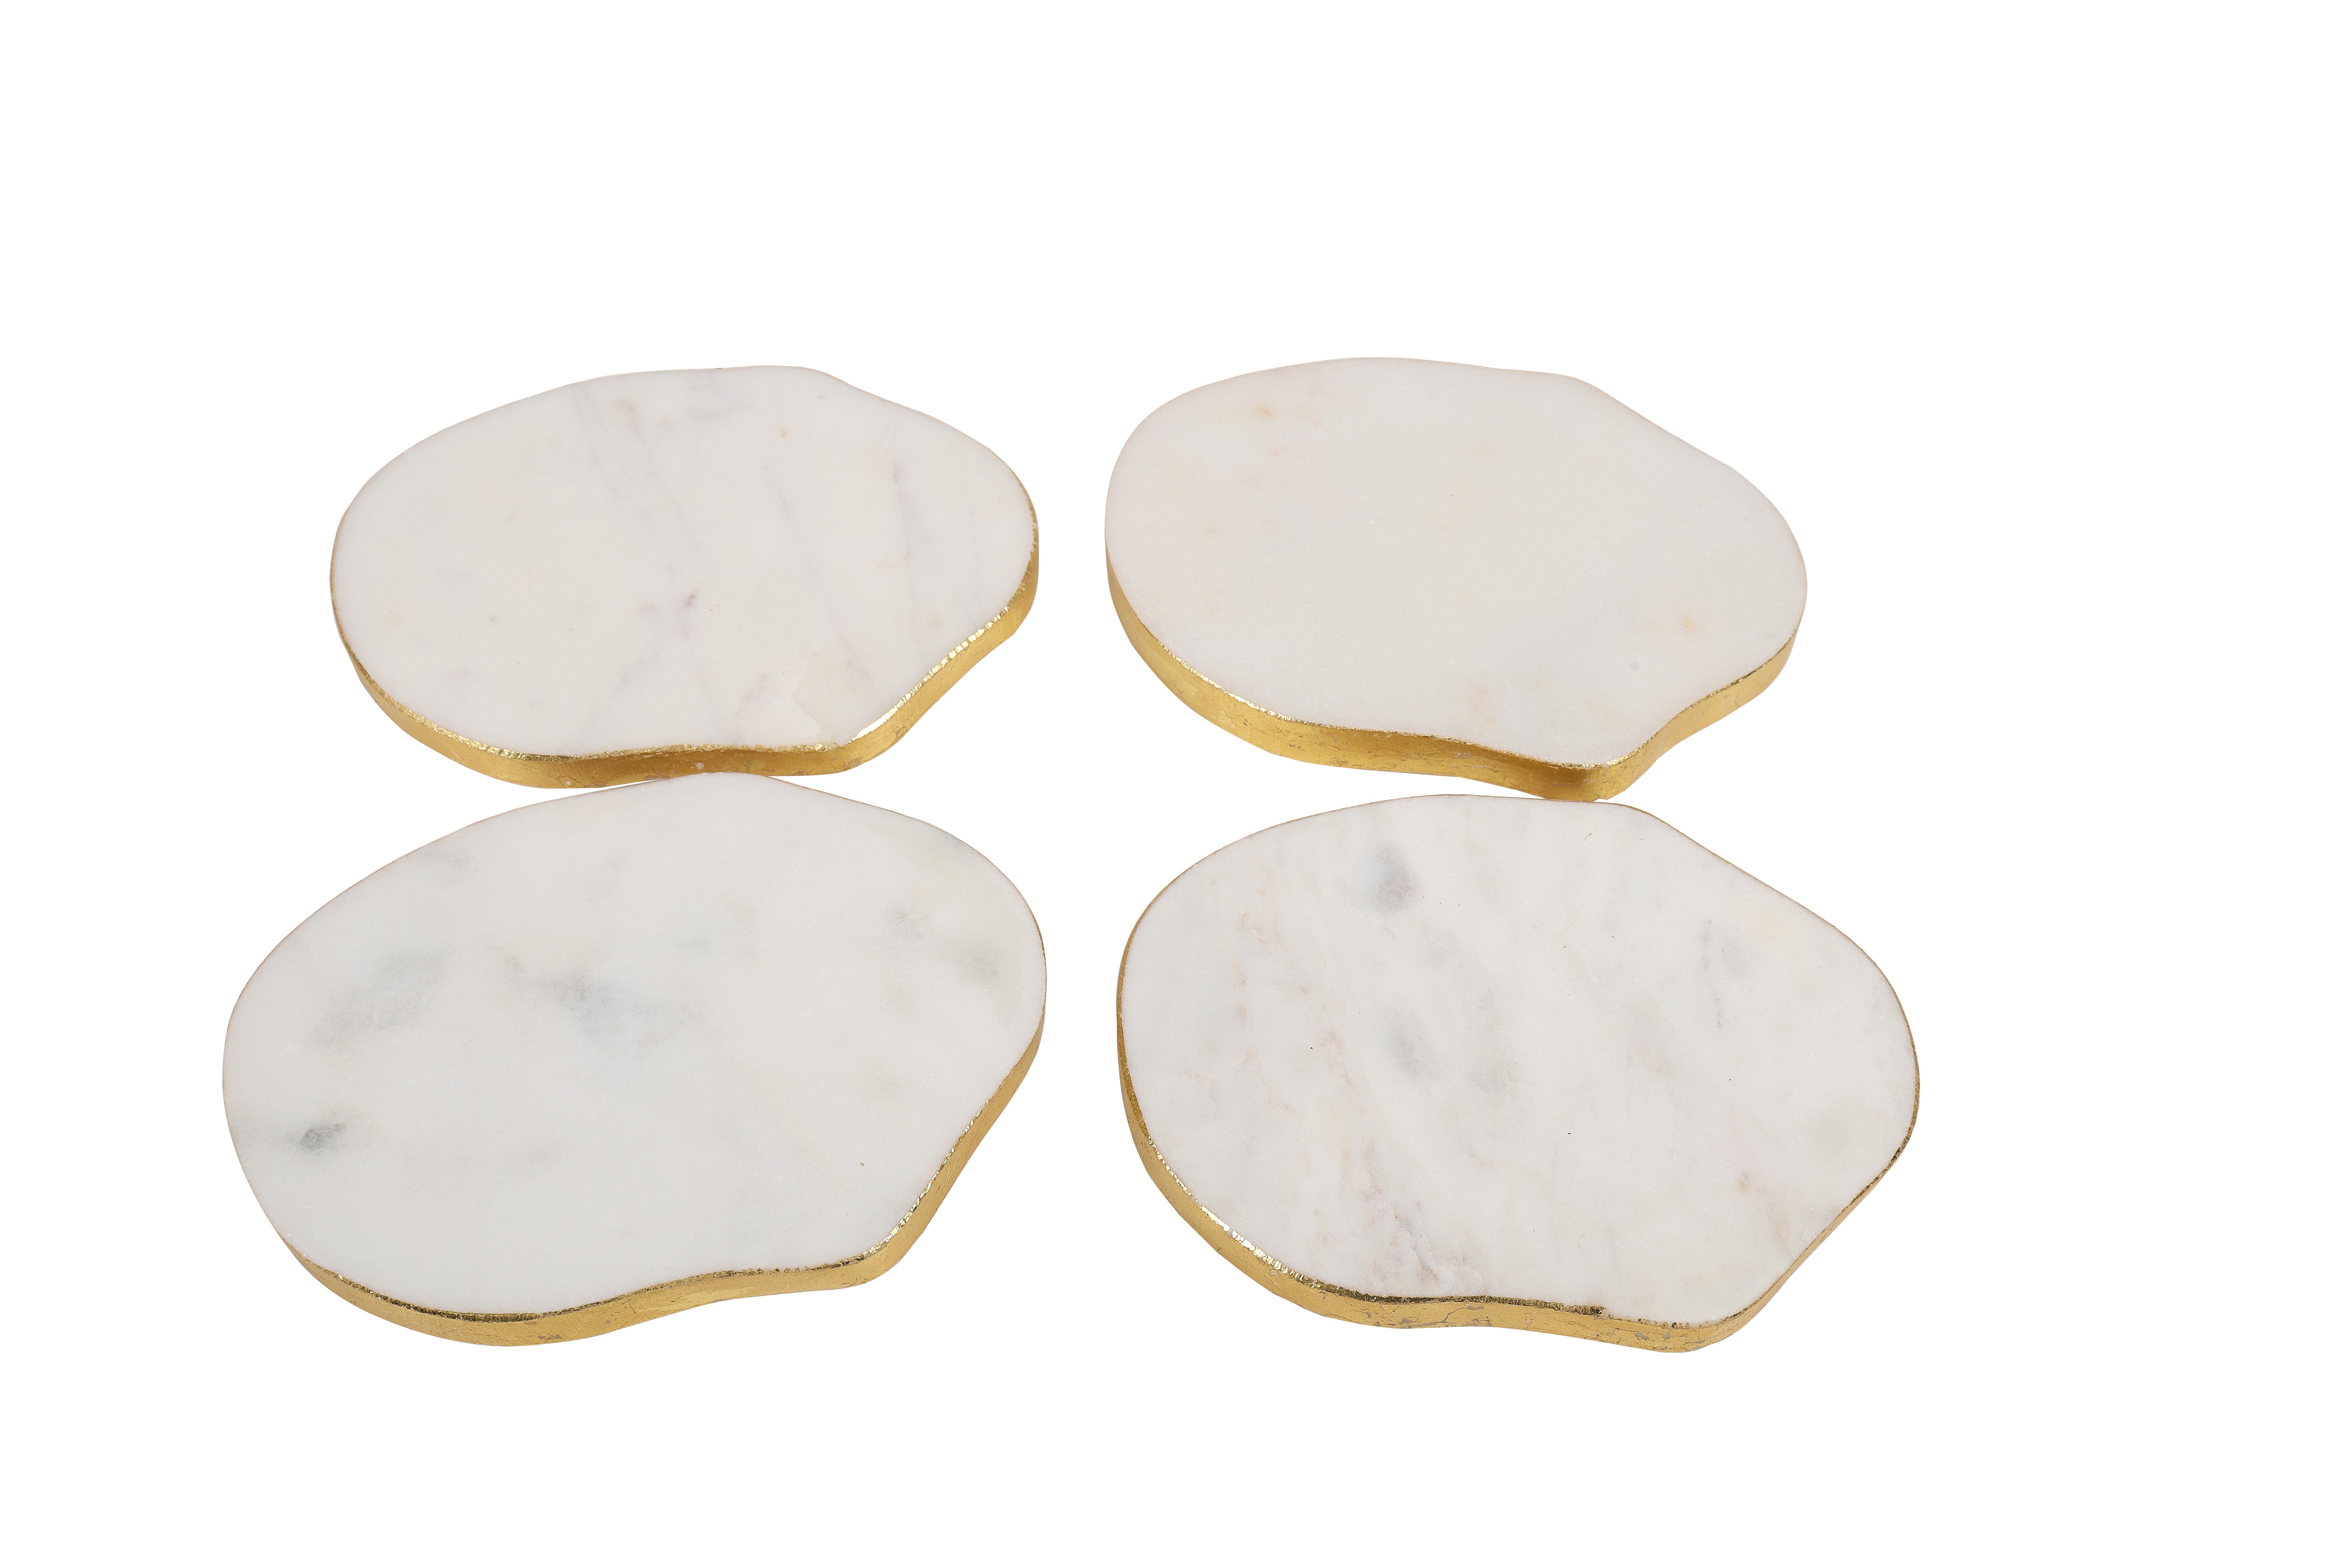 WENDELL MARBLE SET OF 4 COASTERS WITH GOLD FOIL